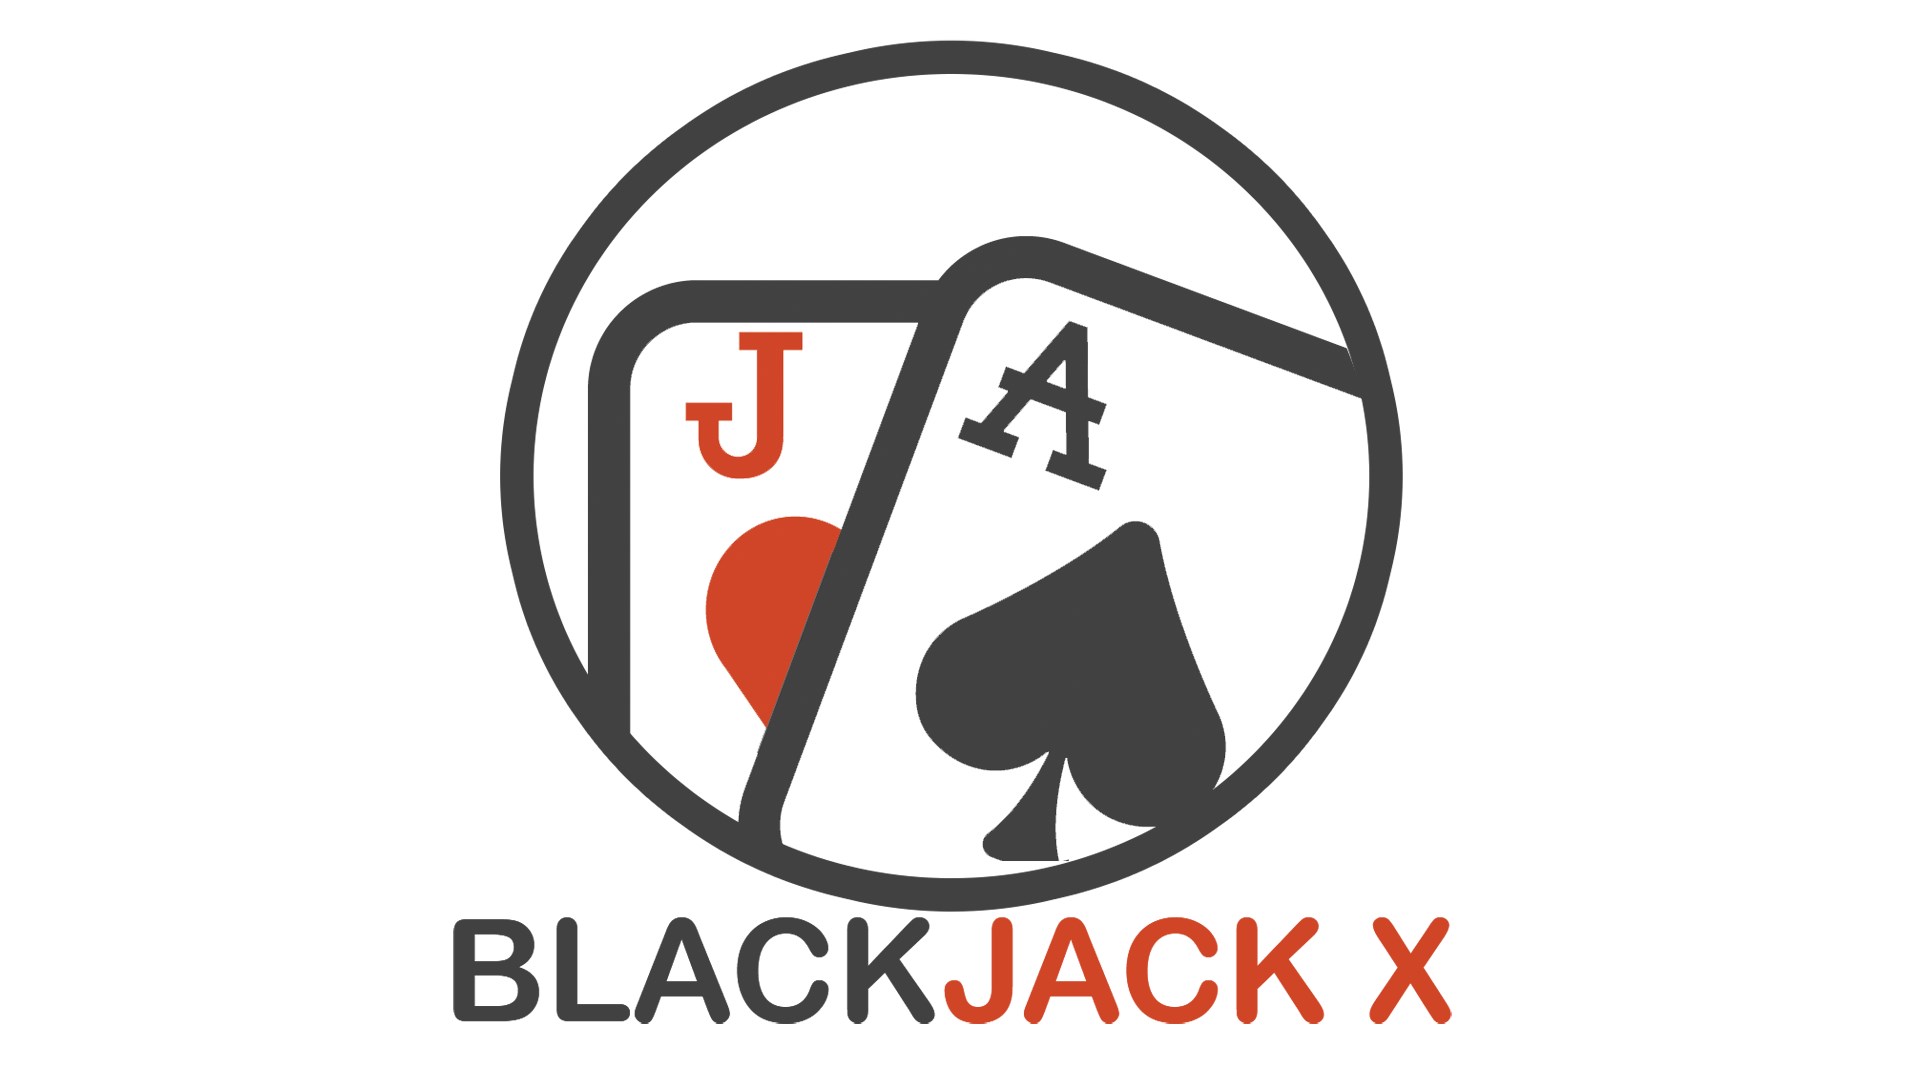 Blackjack also known as crossword clue